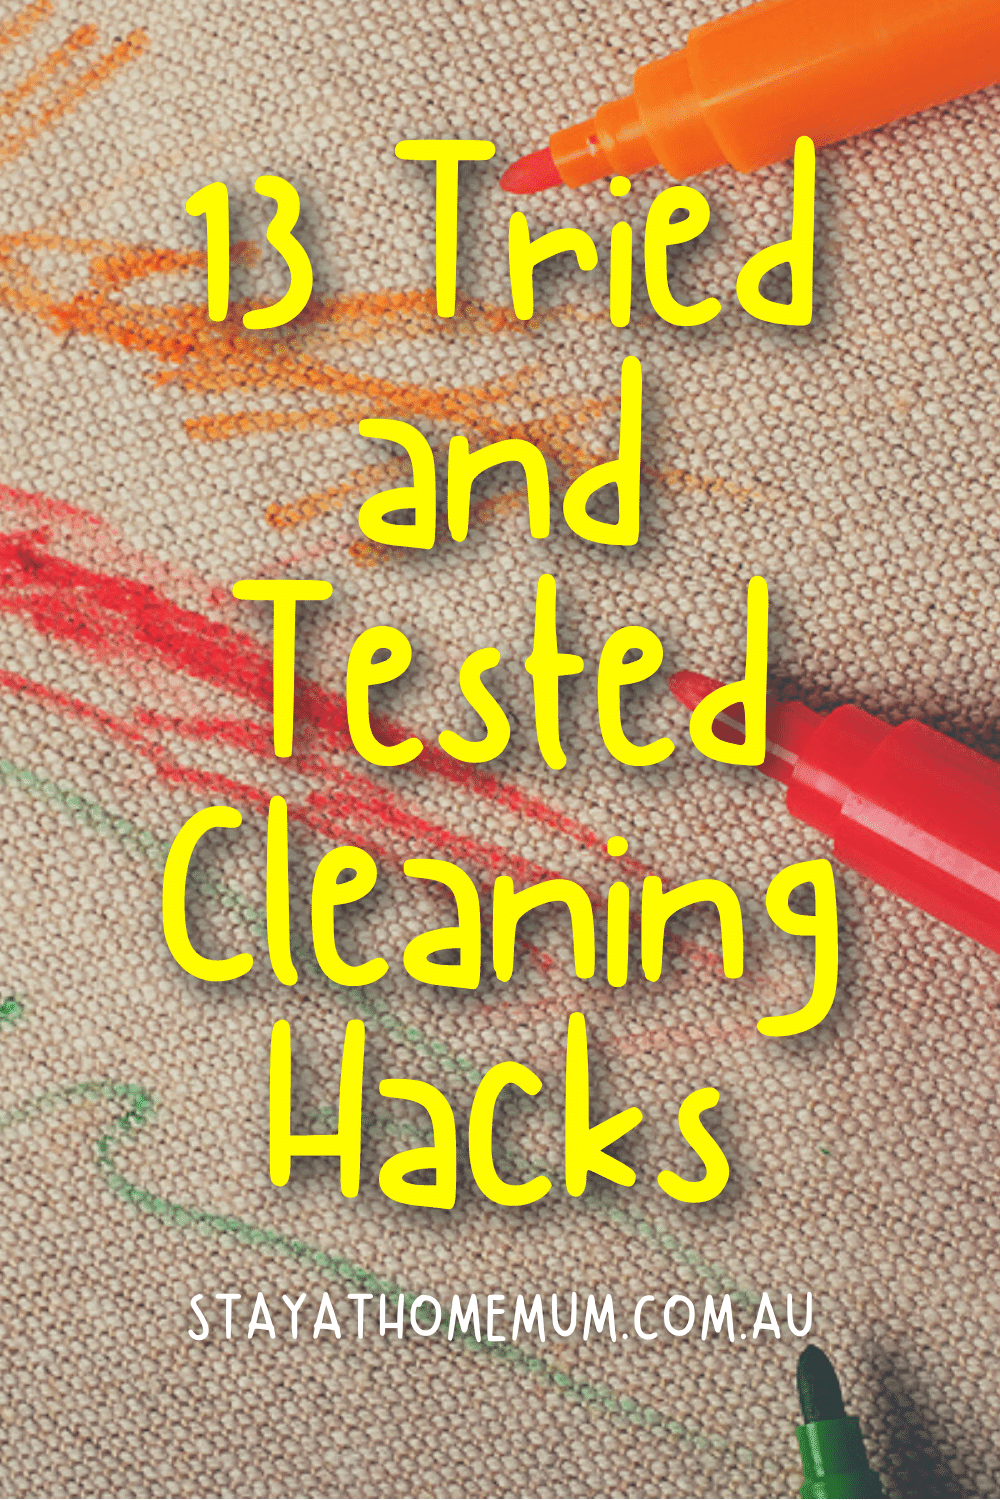 13 Tried and Tested Cleaning Hacks | Stay At Home Mum